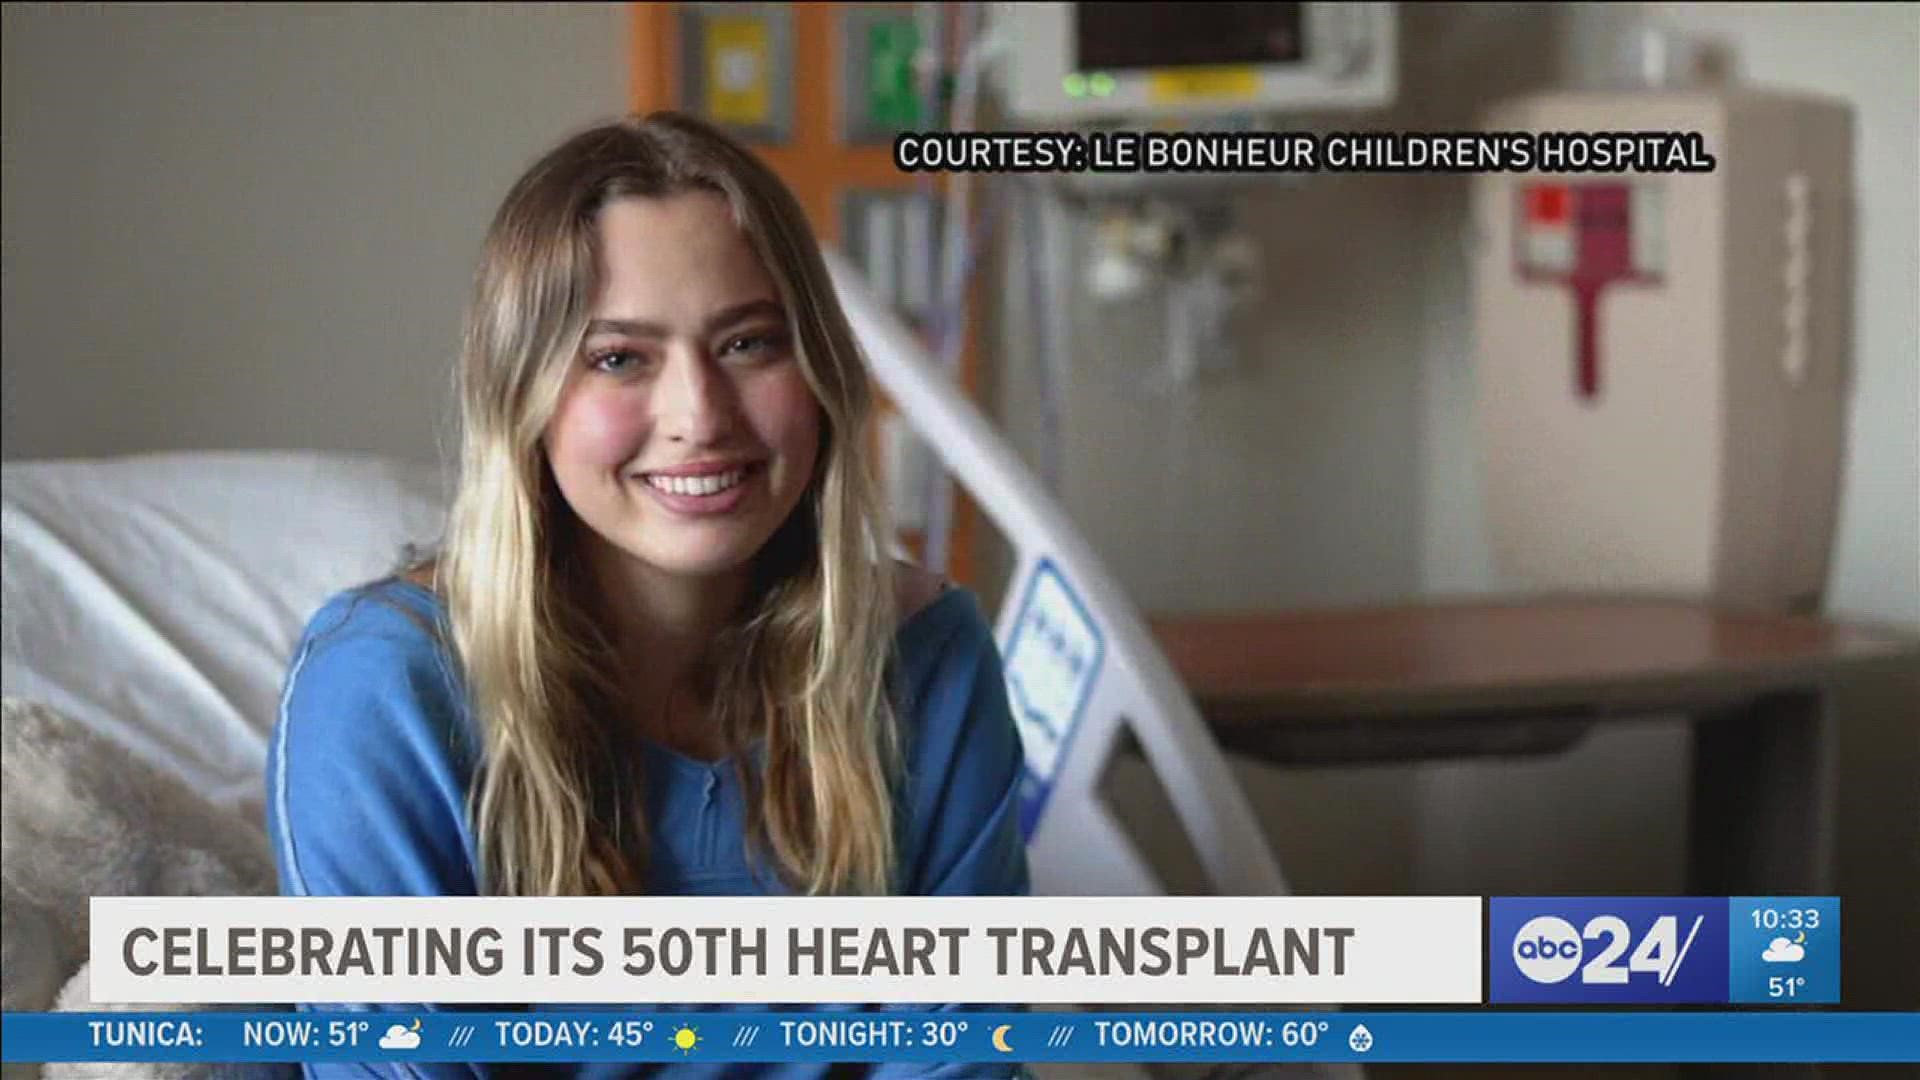 The hospital is also celebrating the 5th anniversary of resuming its heart transplant program.